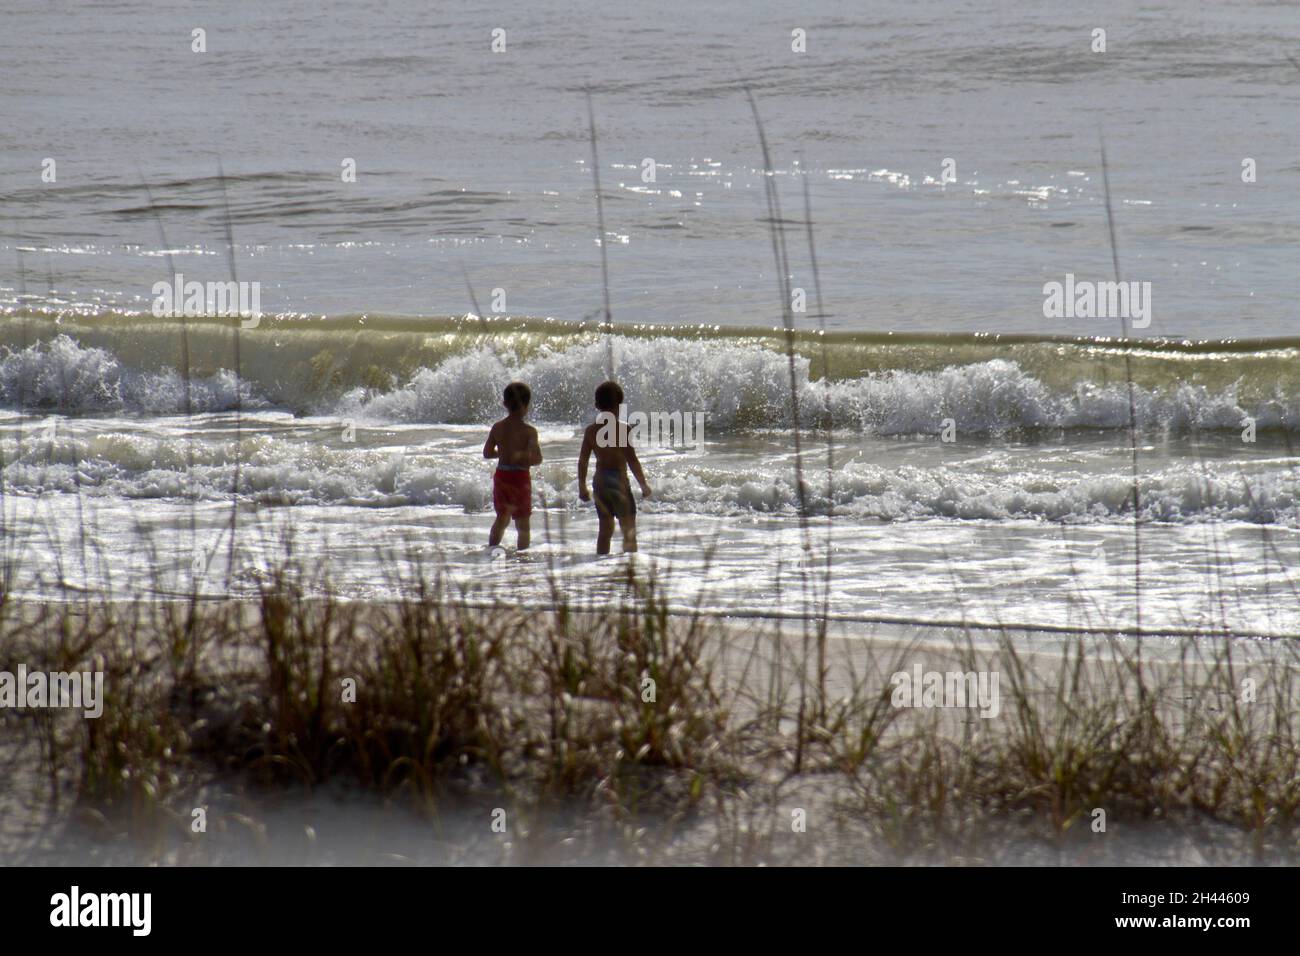 Two curious young black boys venture hesitantly into the ocean, a new childhood adventure Stock Photo